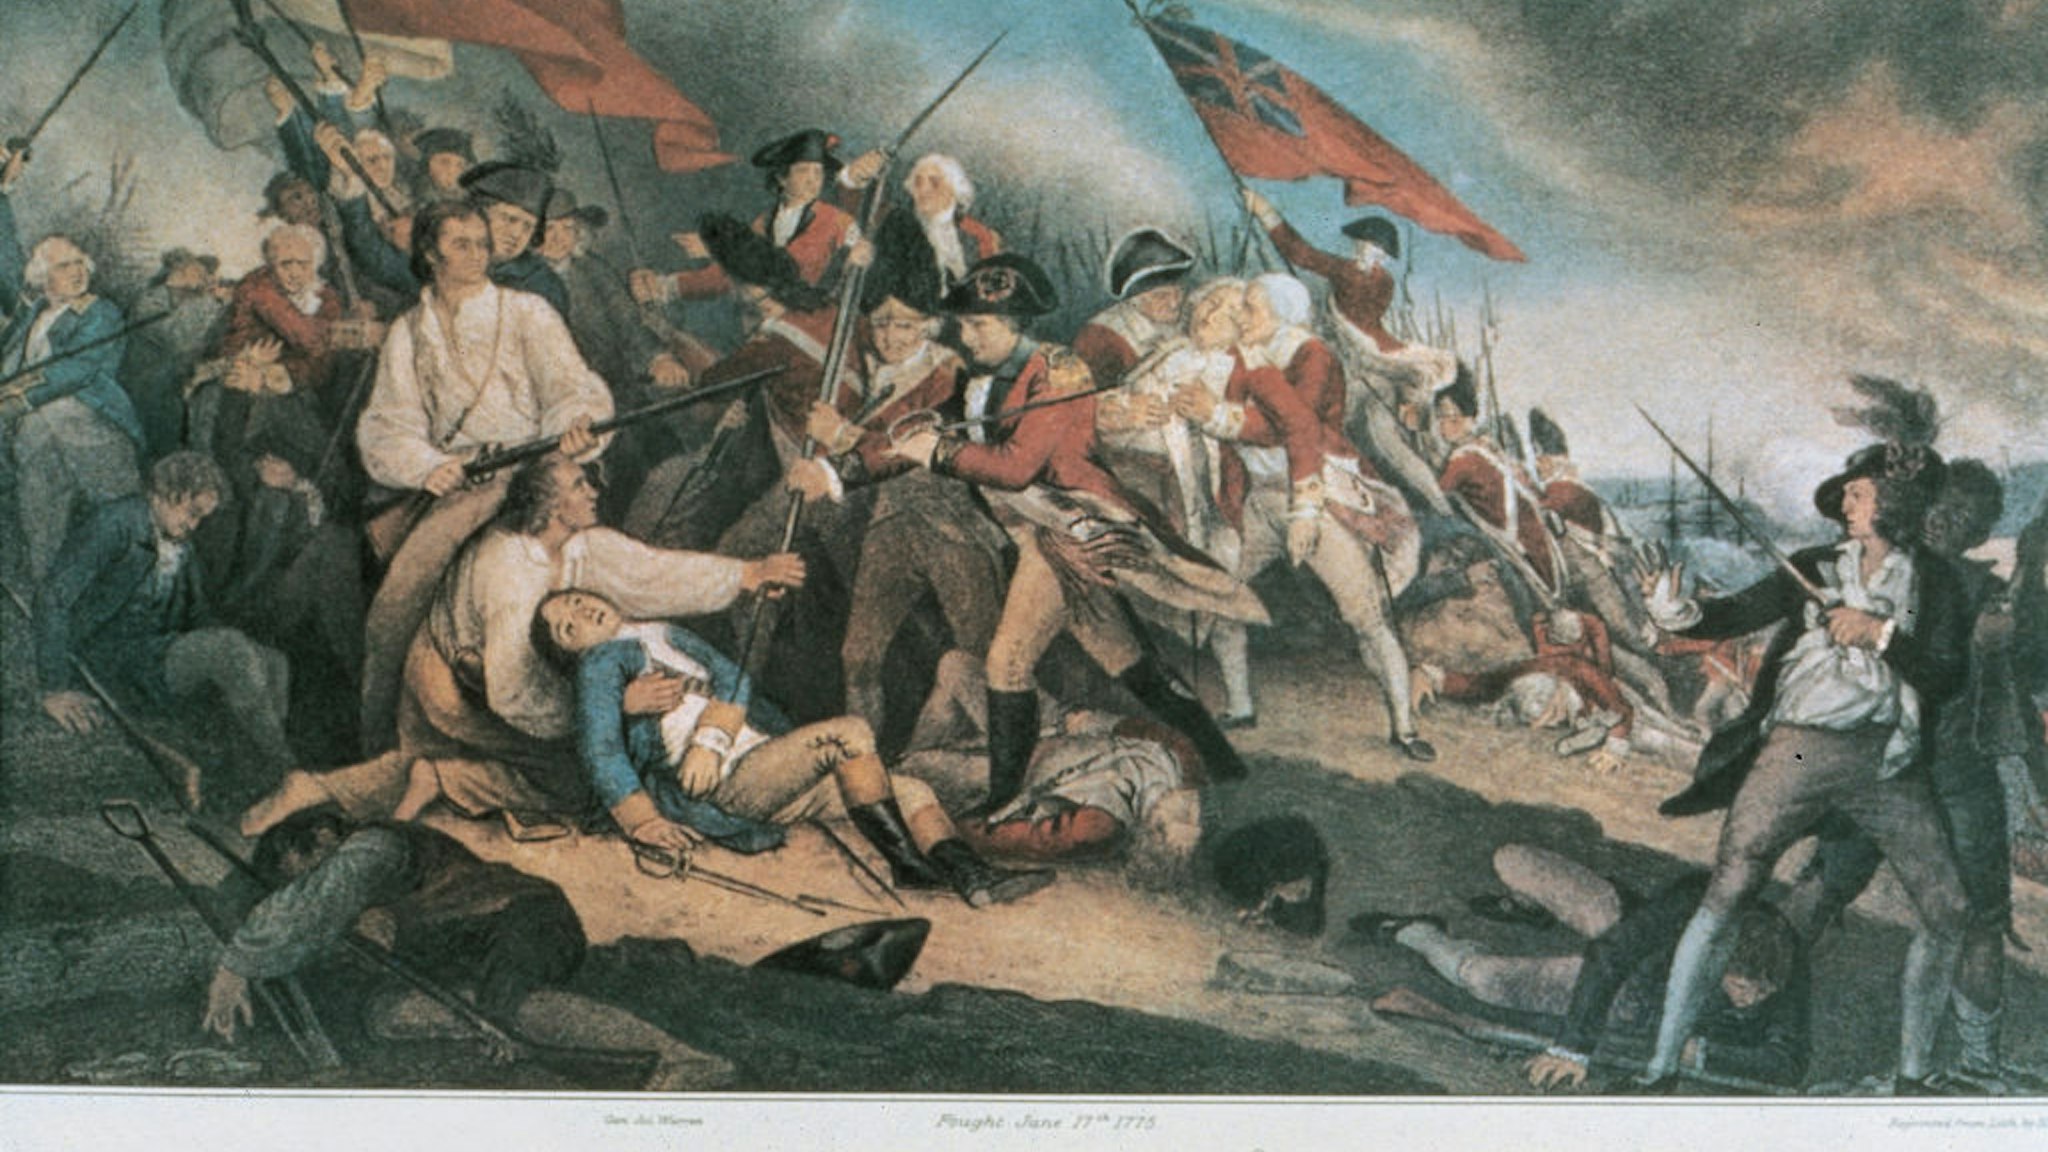 Battle of Bunker Hill on June 17, 1775, United States of America, American Revolutionary War, coloured engraving from a painting by John Trumbull.